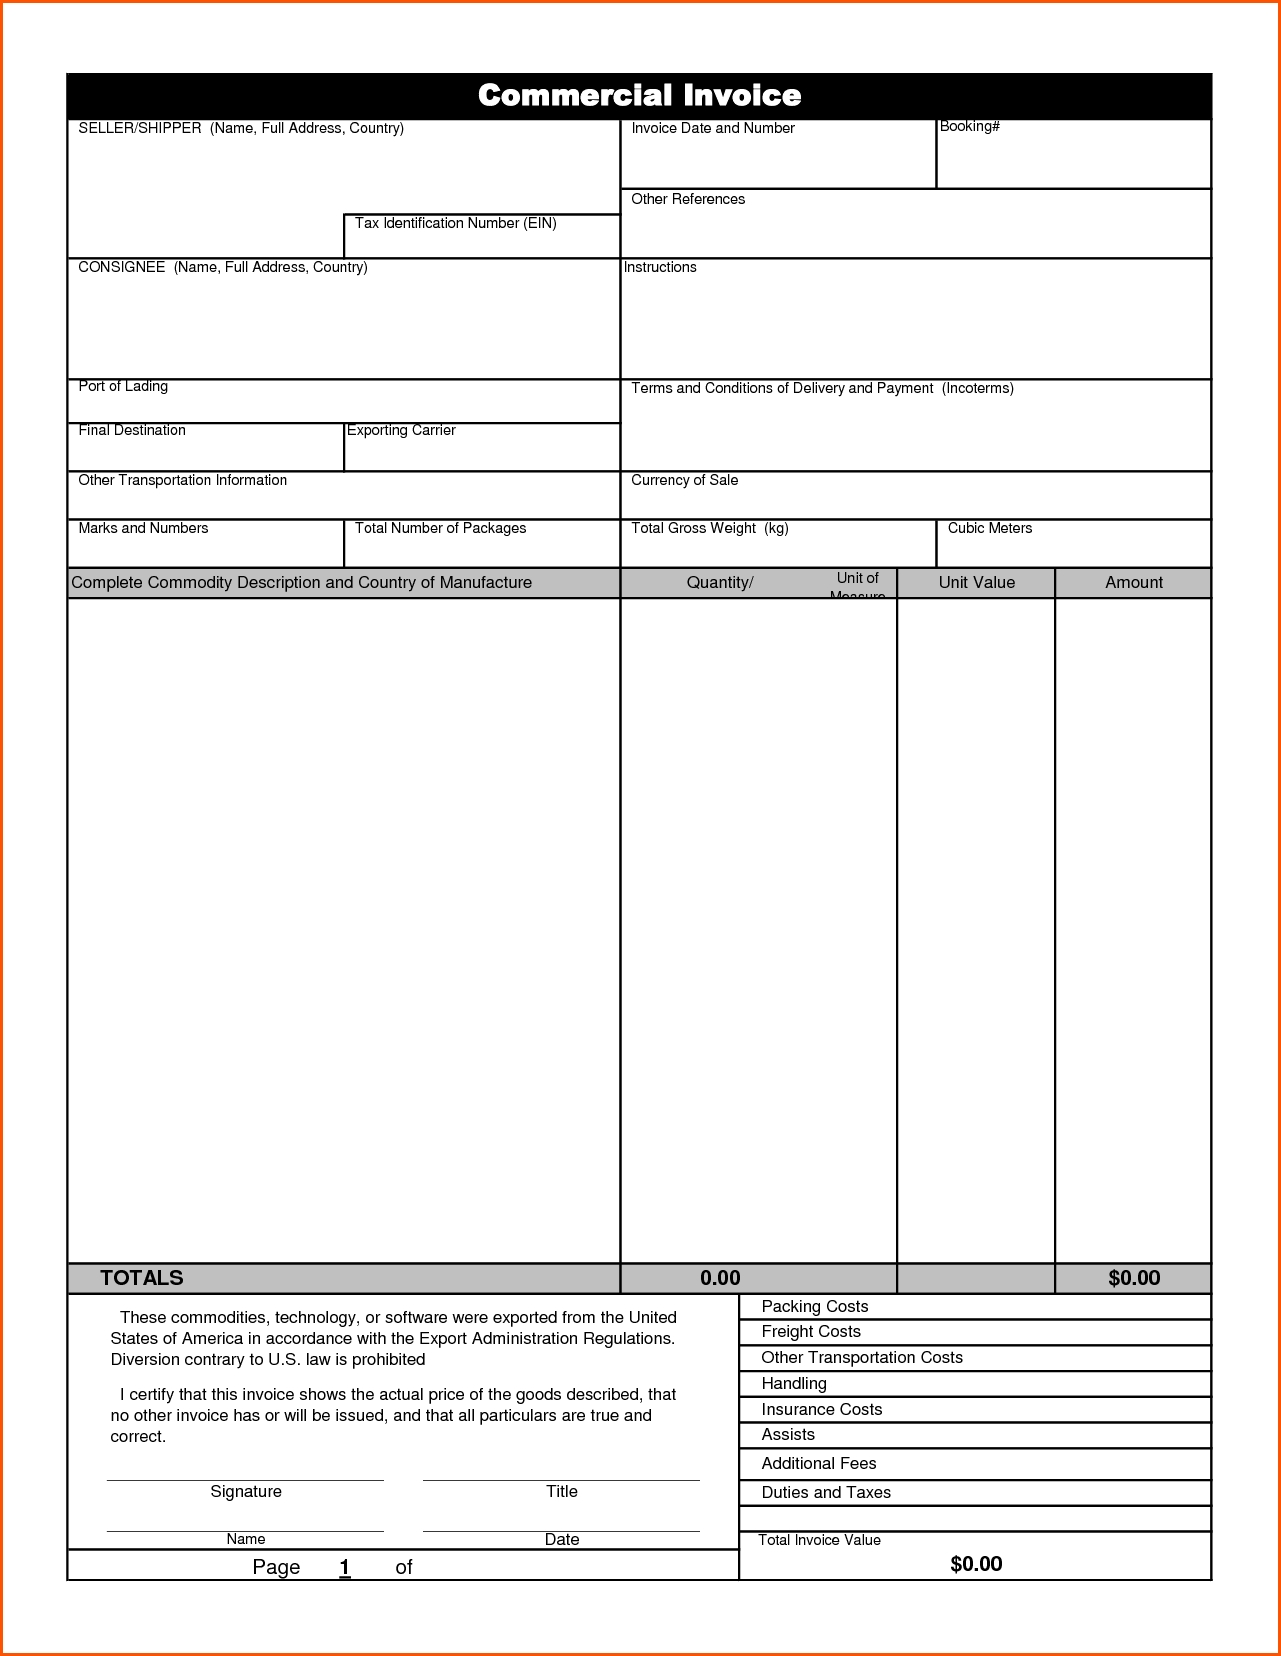 commercial invoice sample excel 13 commercial invoice template excel denial letter sample 1281 X 1656